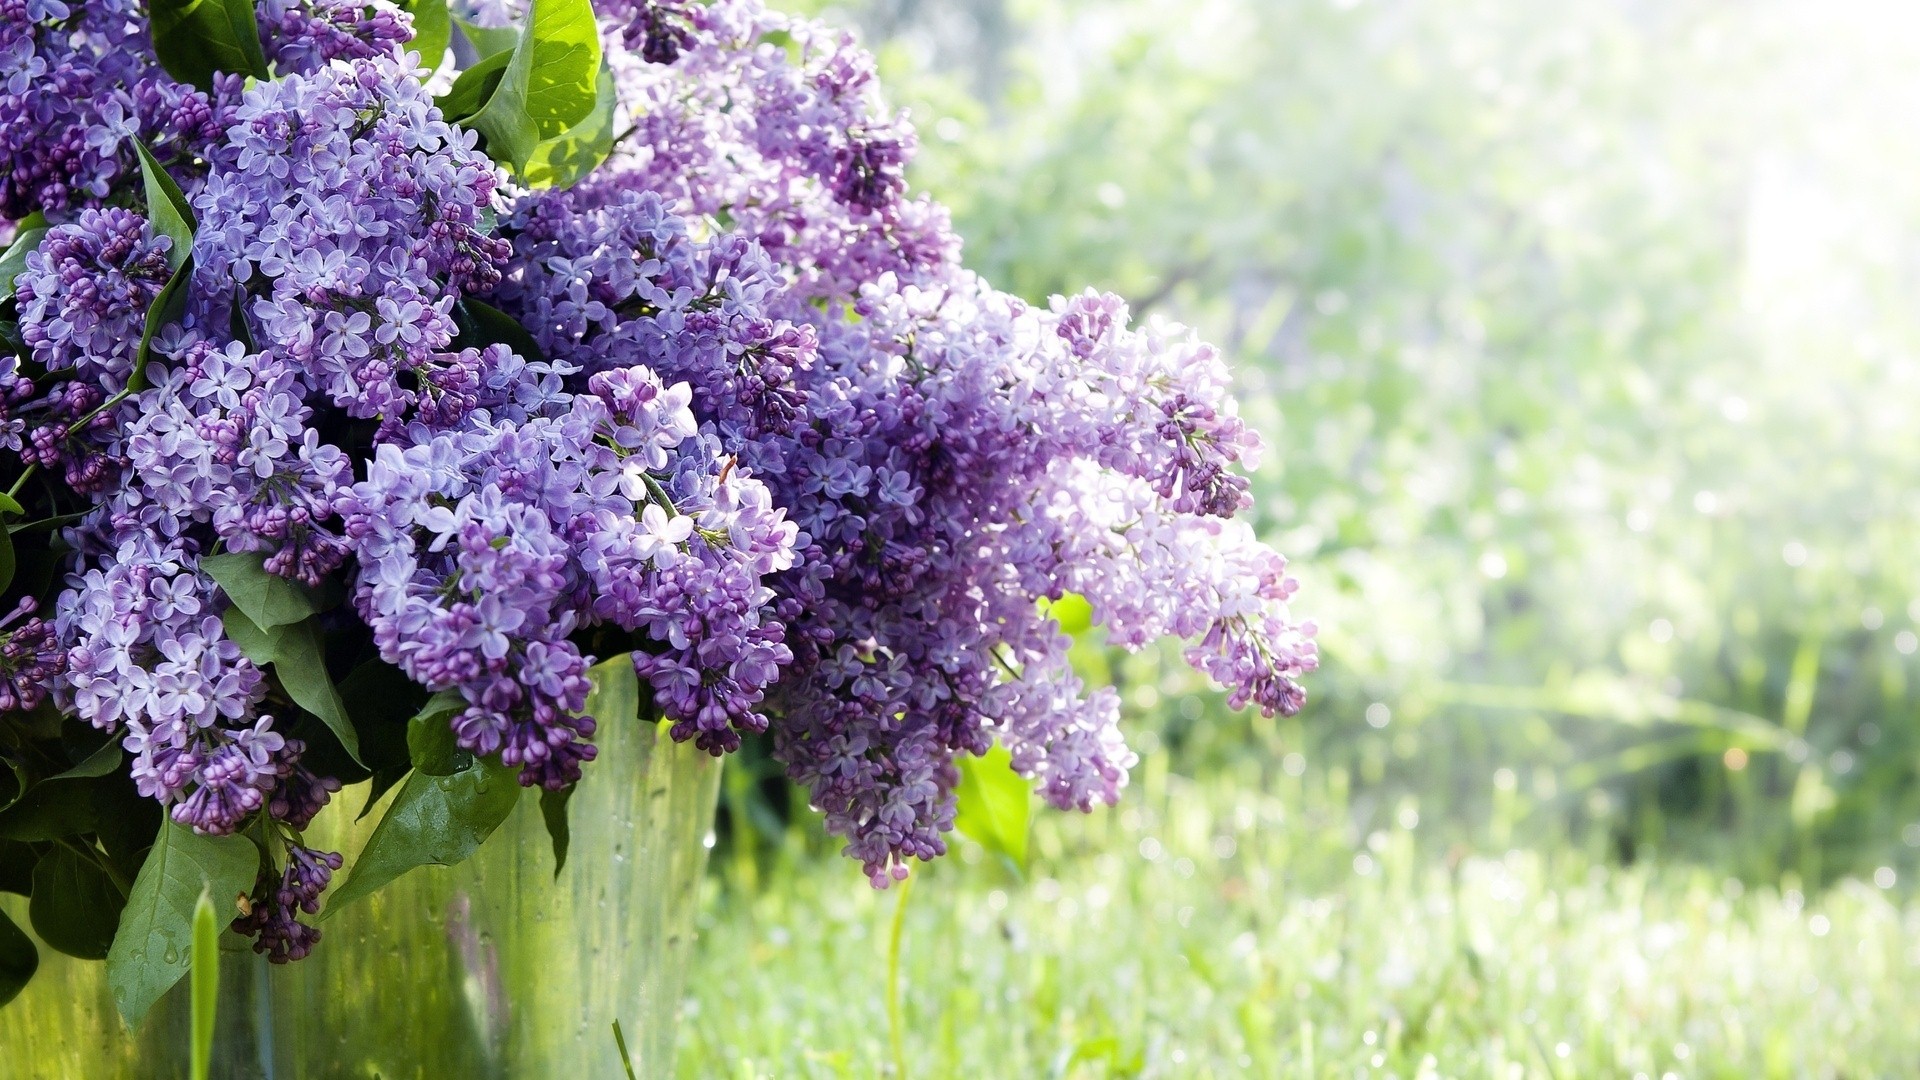  03 2014 category flowers downloads 7720 tags lilac flowers views 15933 1920x1080